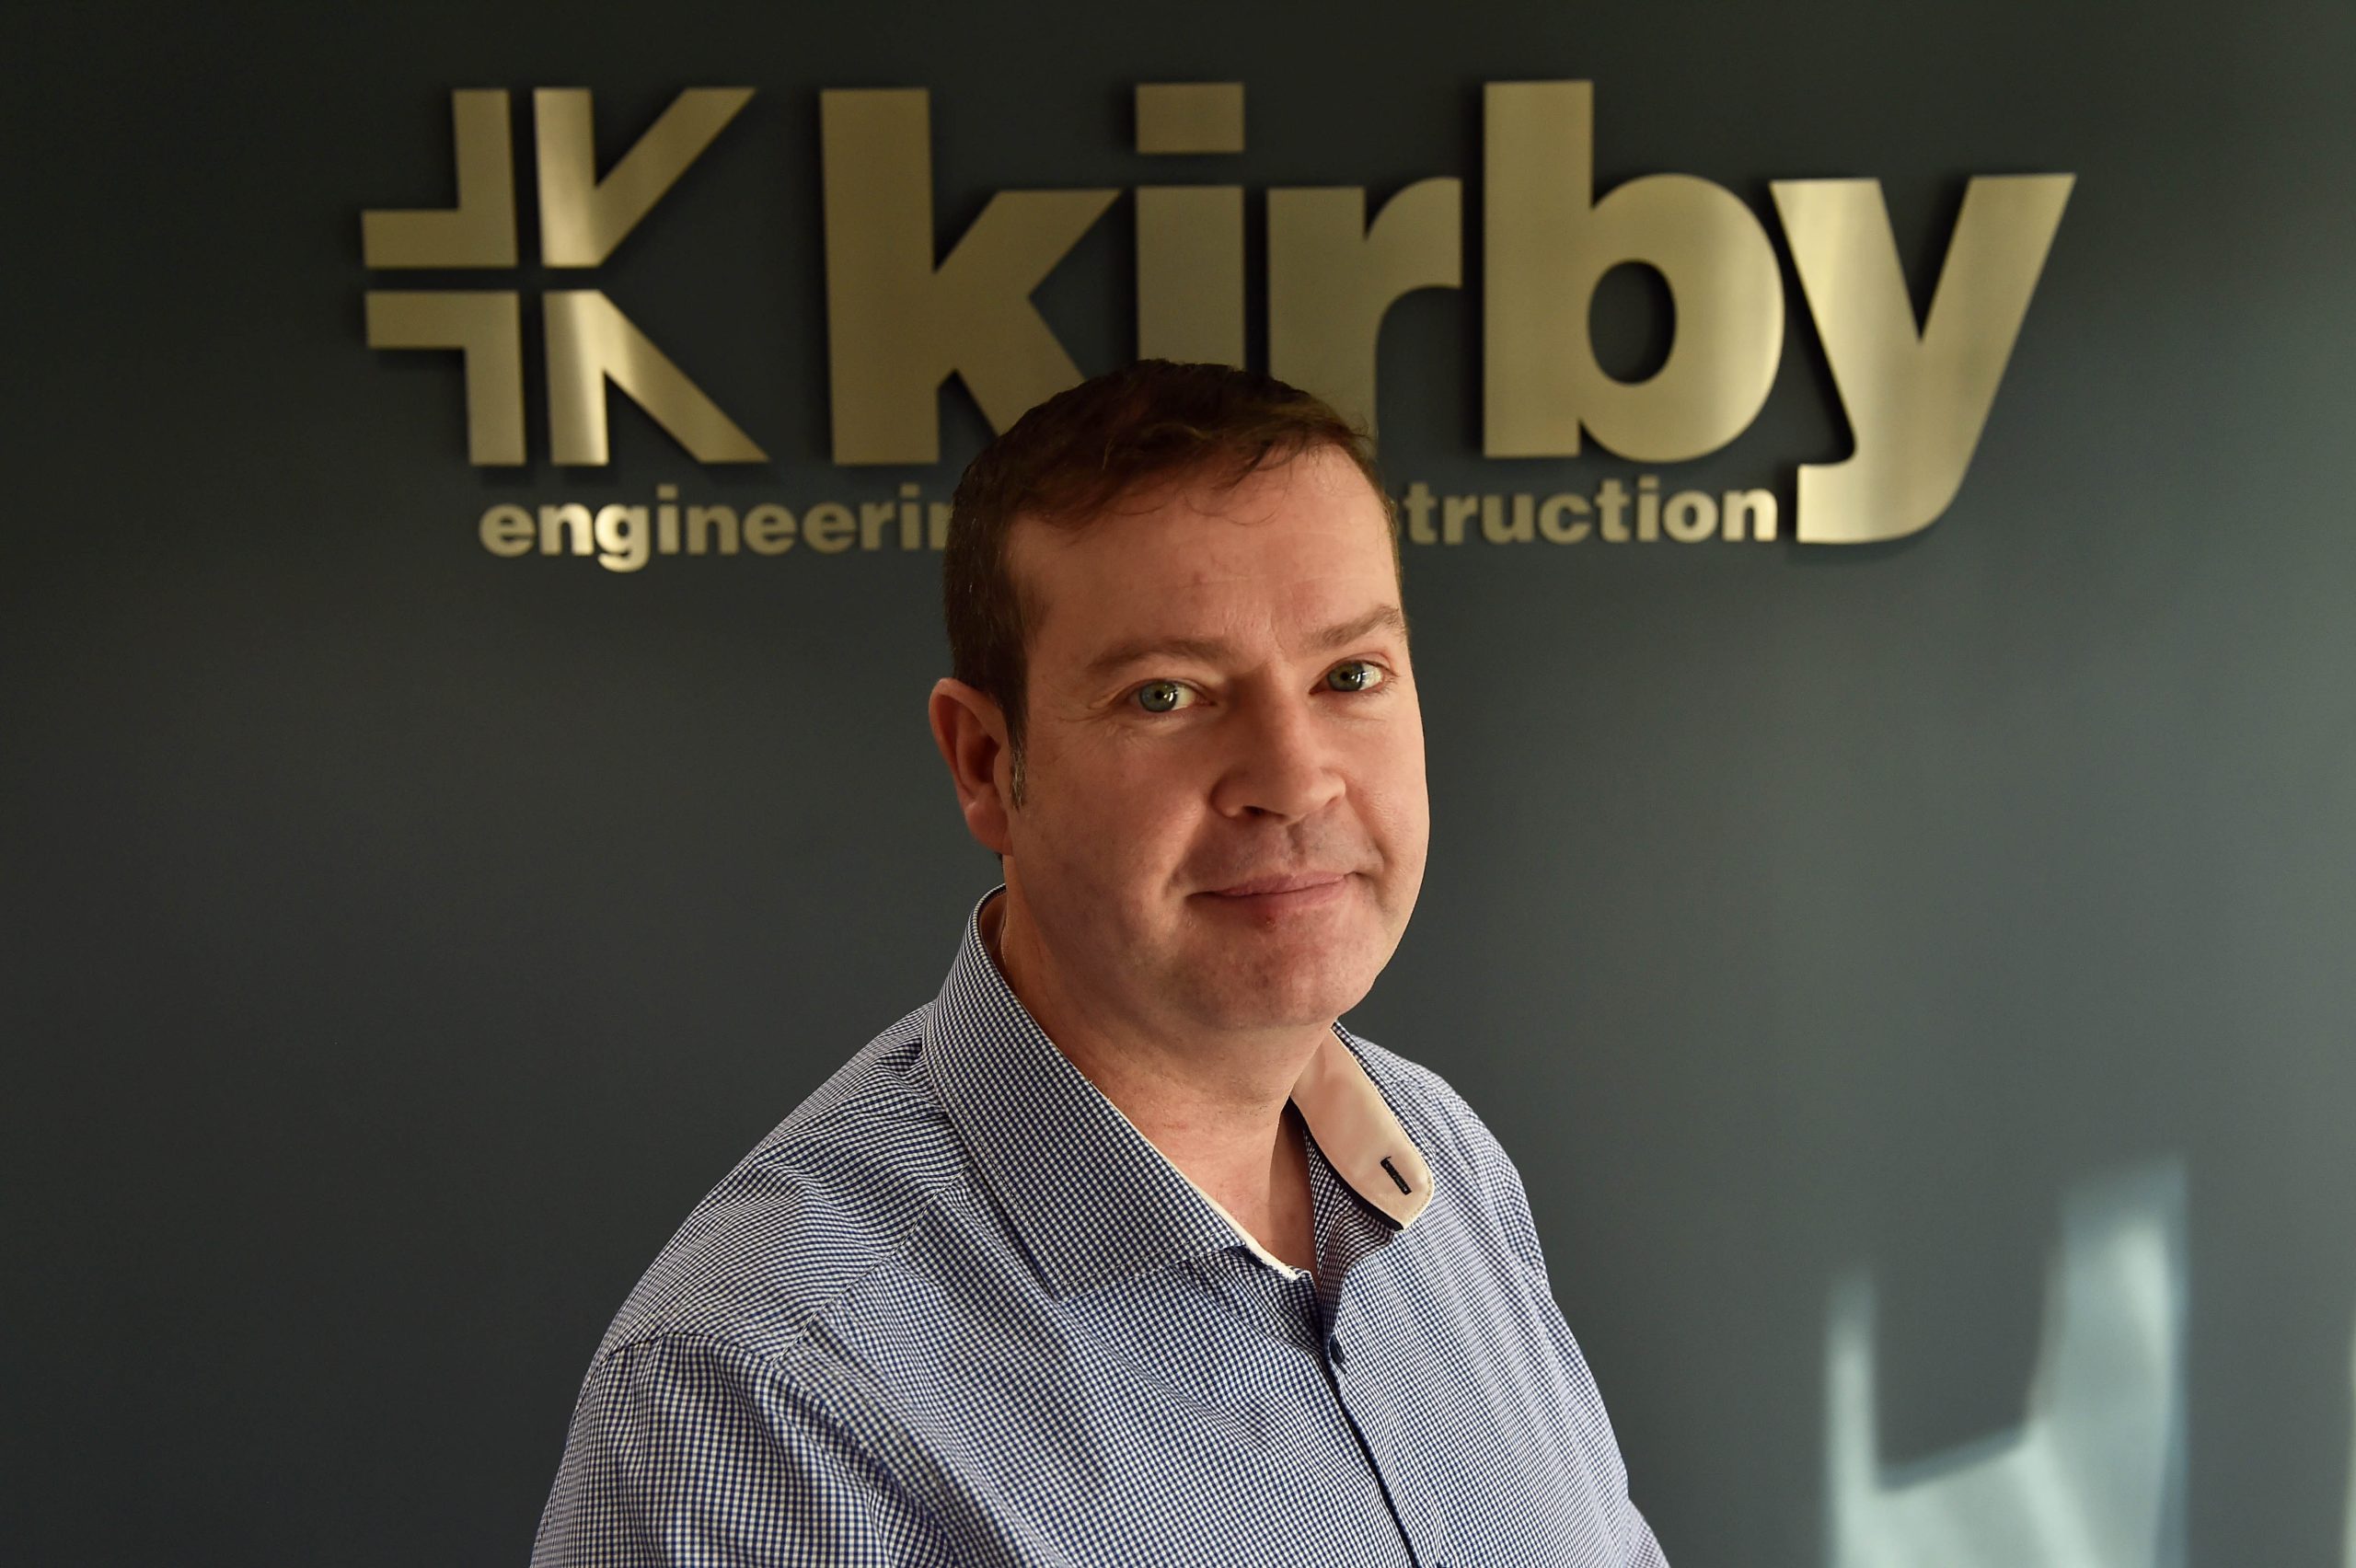 Kirby engineering and Construction Company receives International